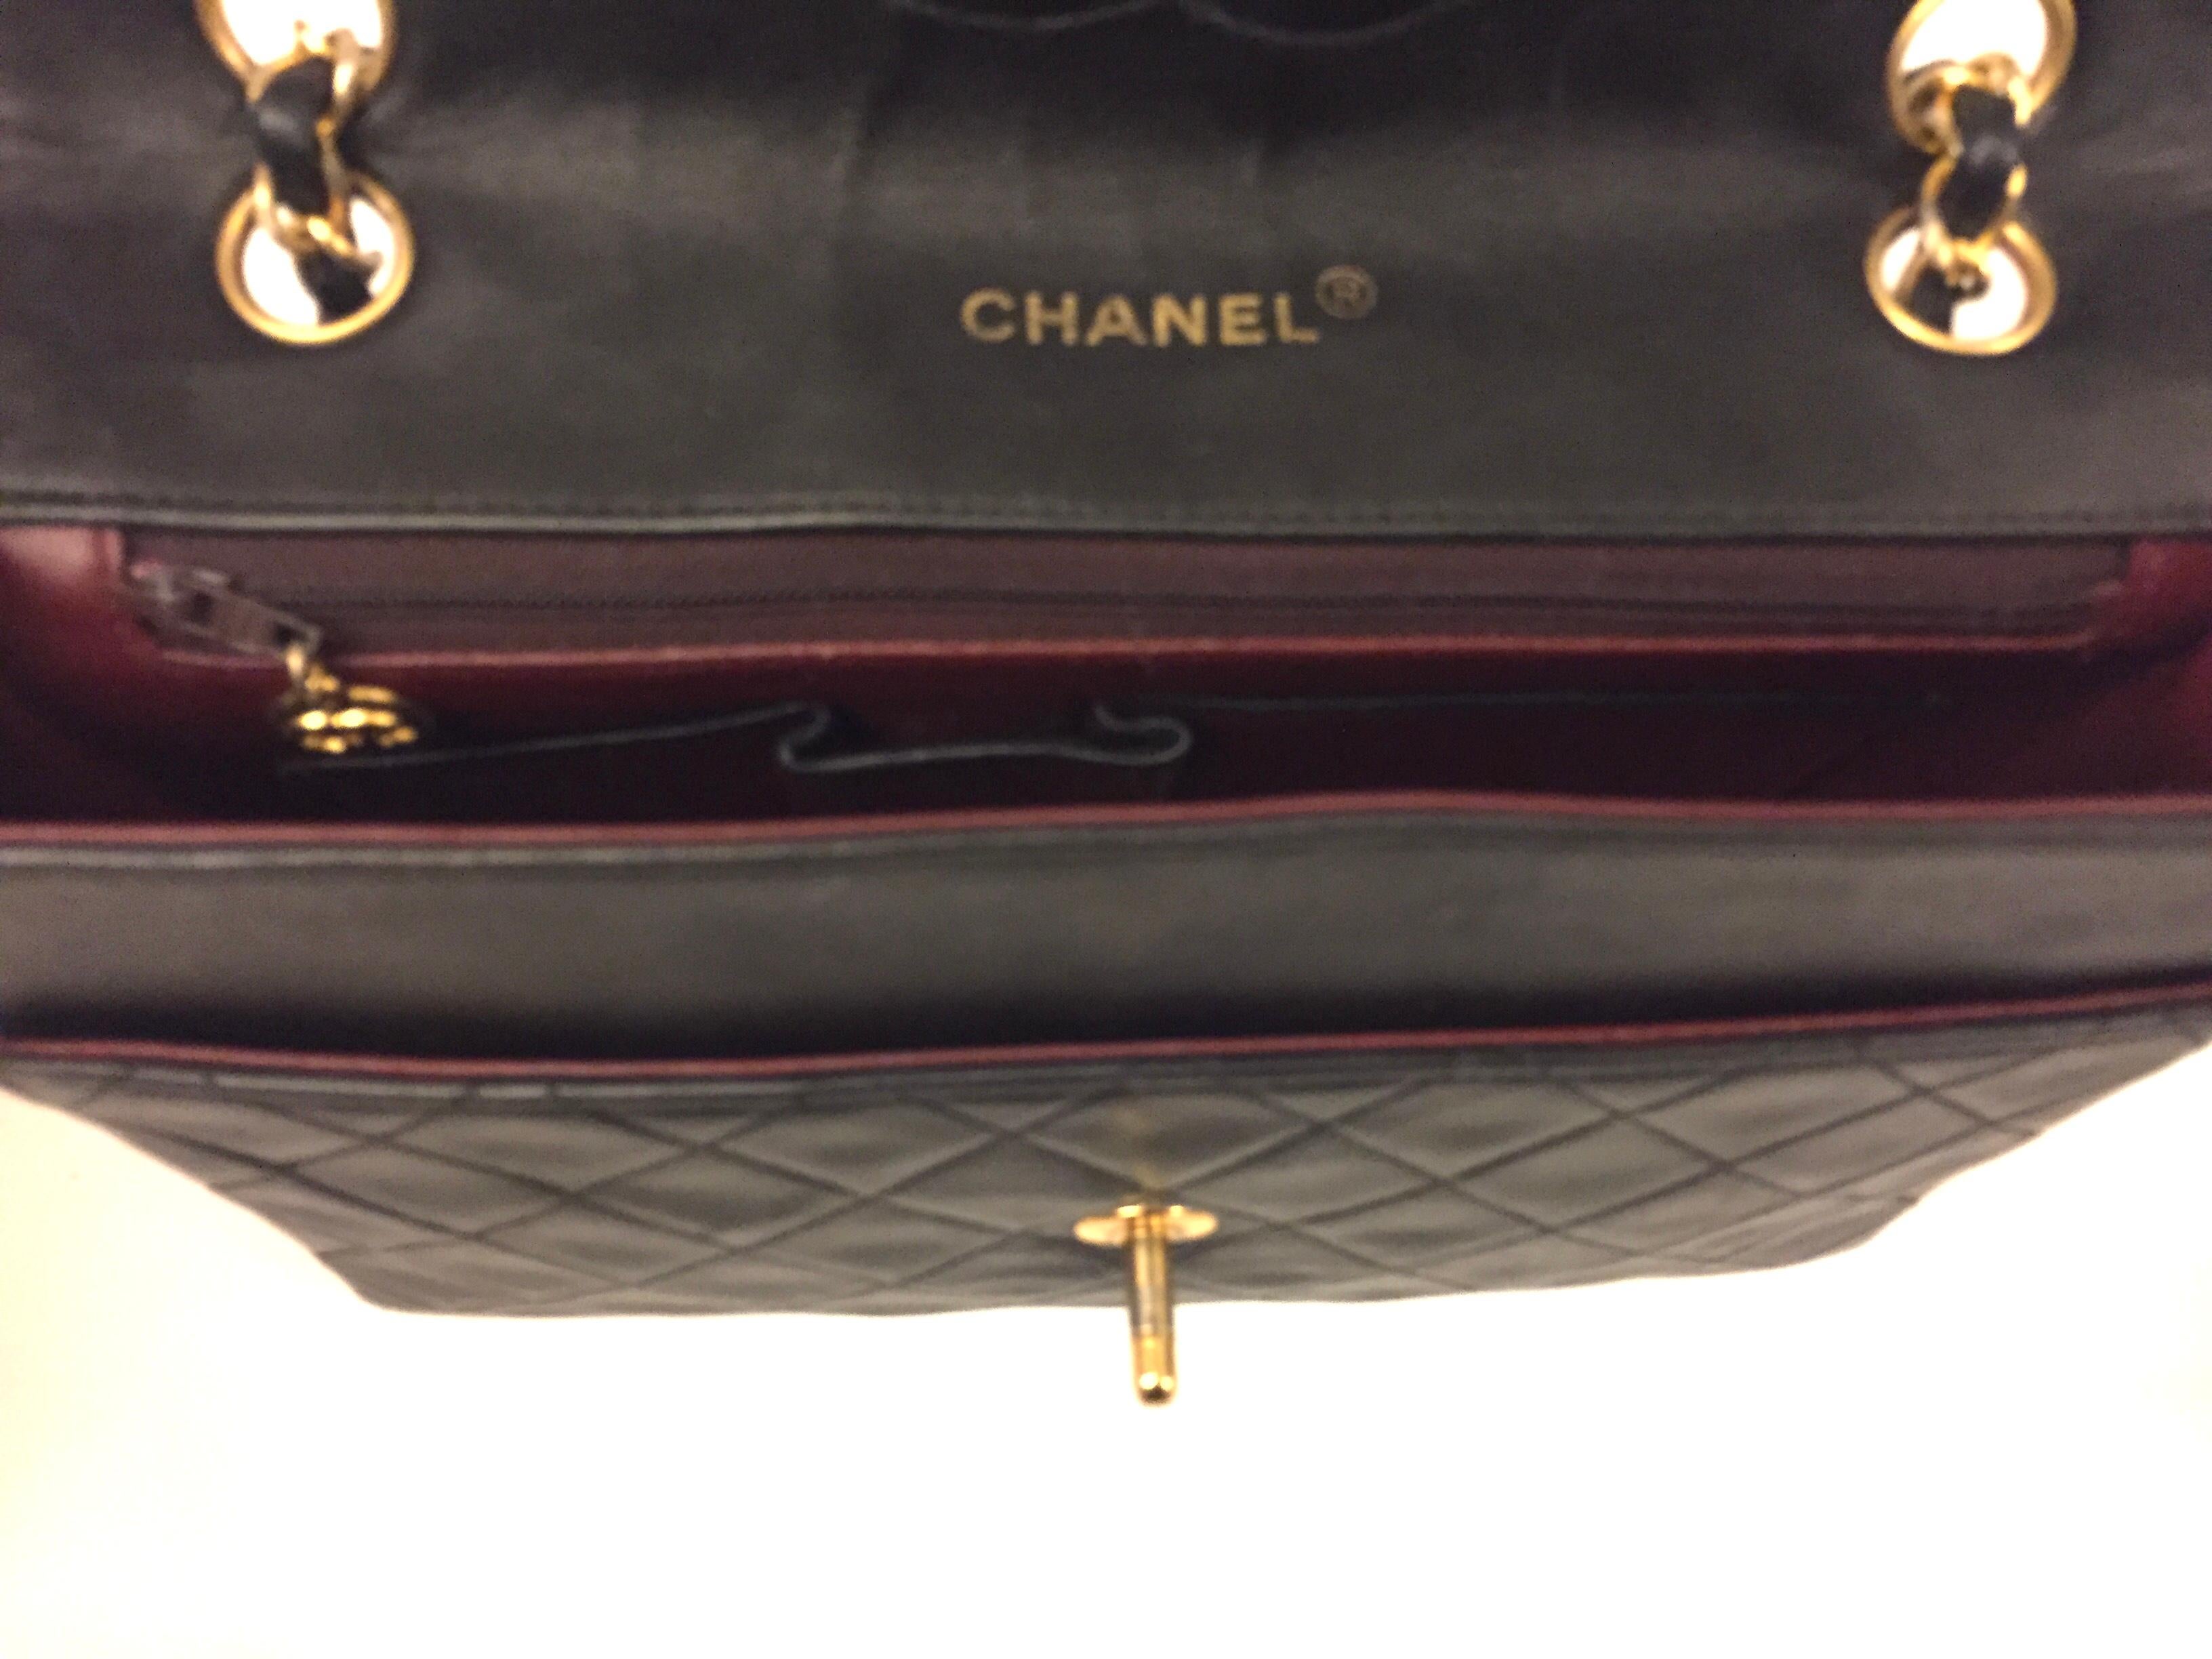 black chanel bag with red interior